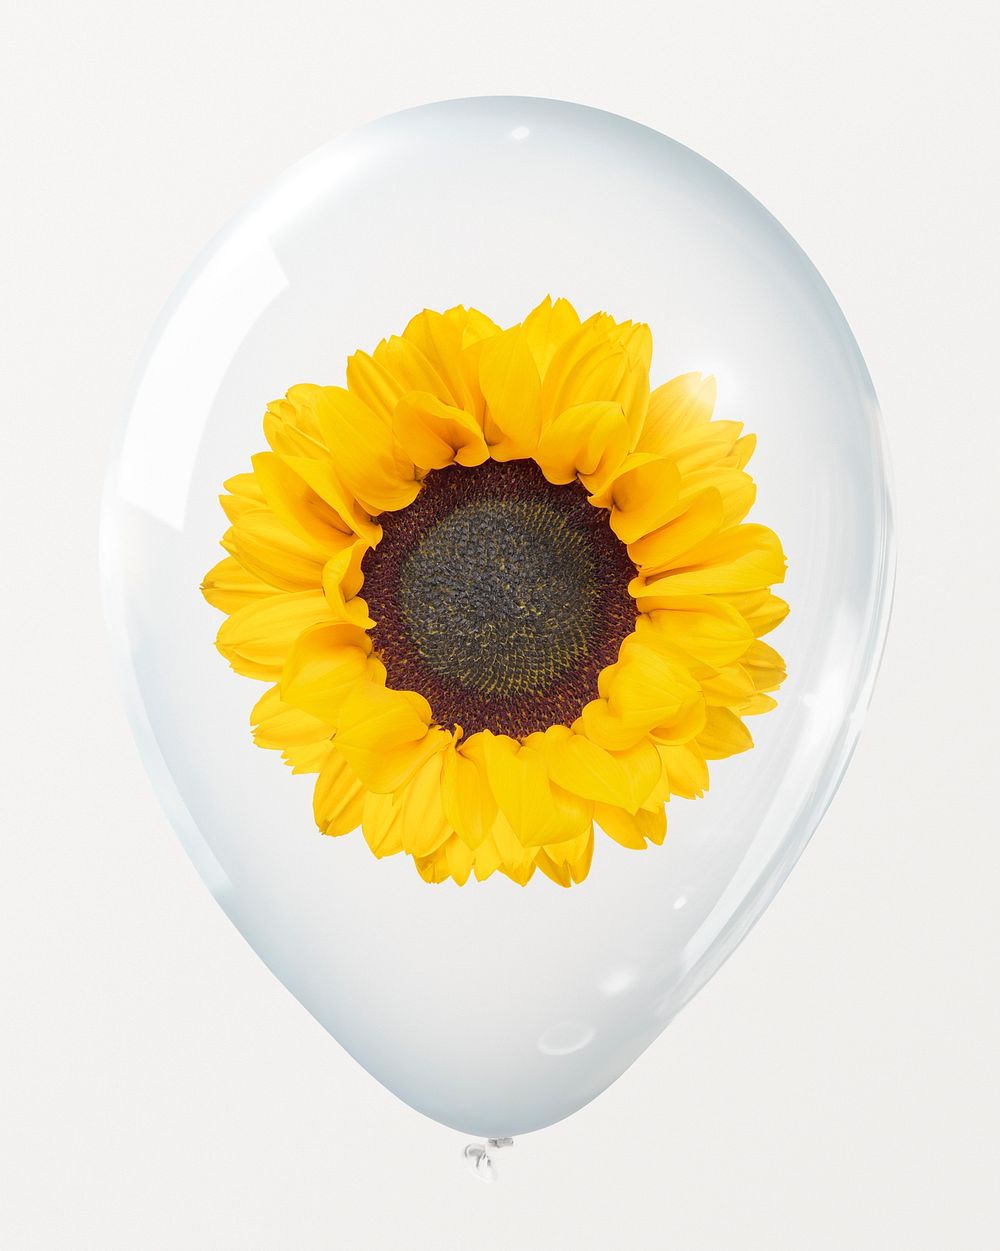 Sunflower blooming in clear balloon